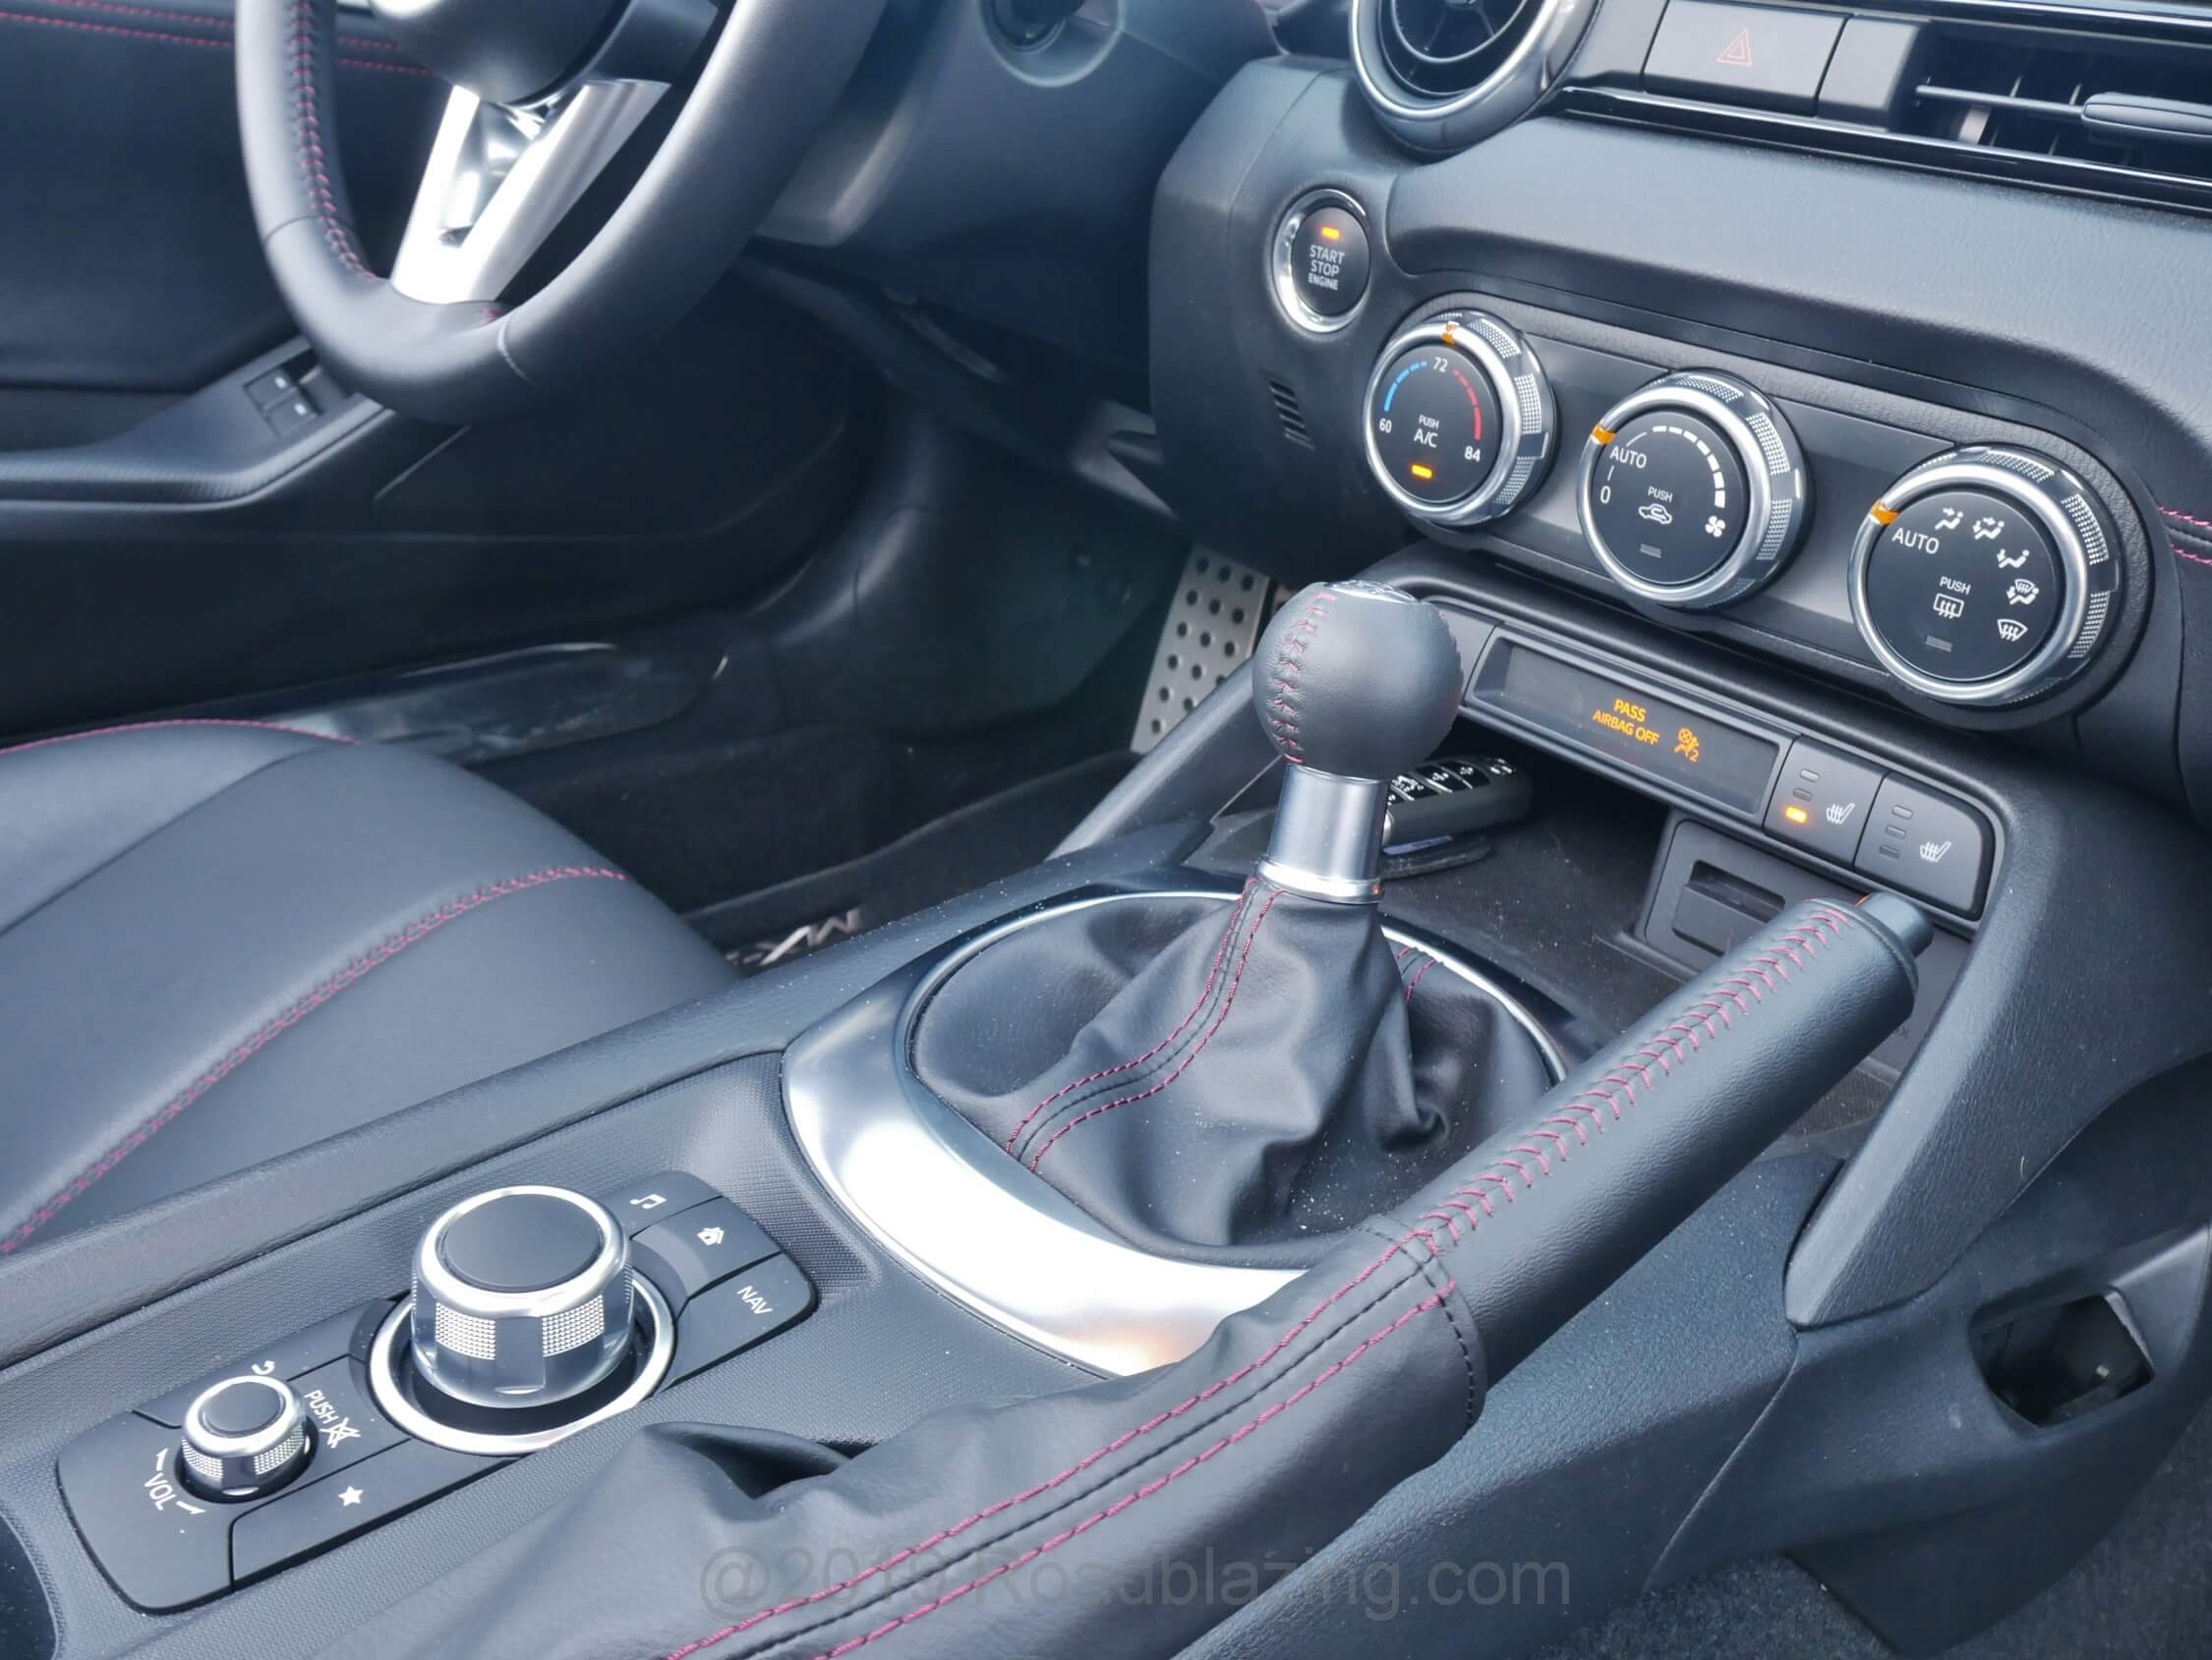 2019 Mazda MX-5 Grand Touring: Center console dominated by 6-speed manual transmission short throw shifter, now with dual mass flywheel, and machined alloy i-Connect infotainment Commader twist / toggle dial and twist audio volume dial.